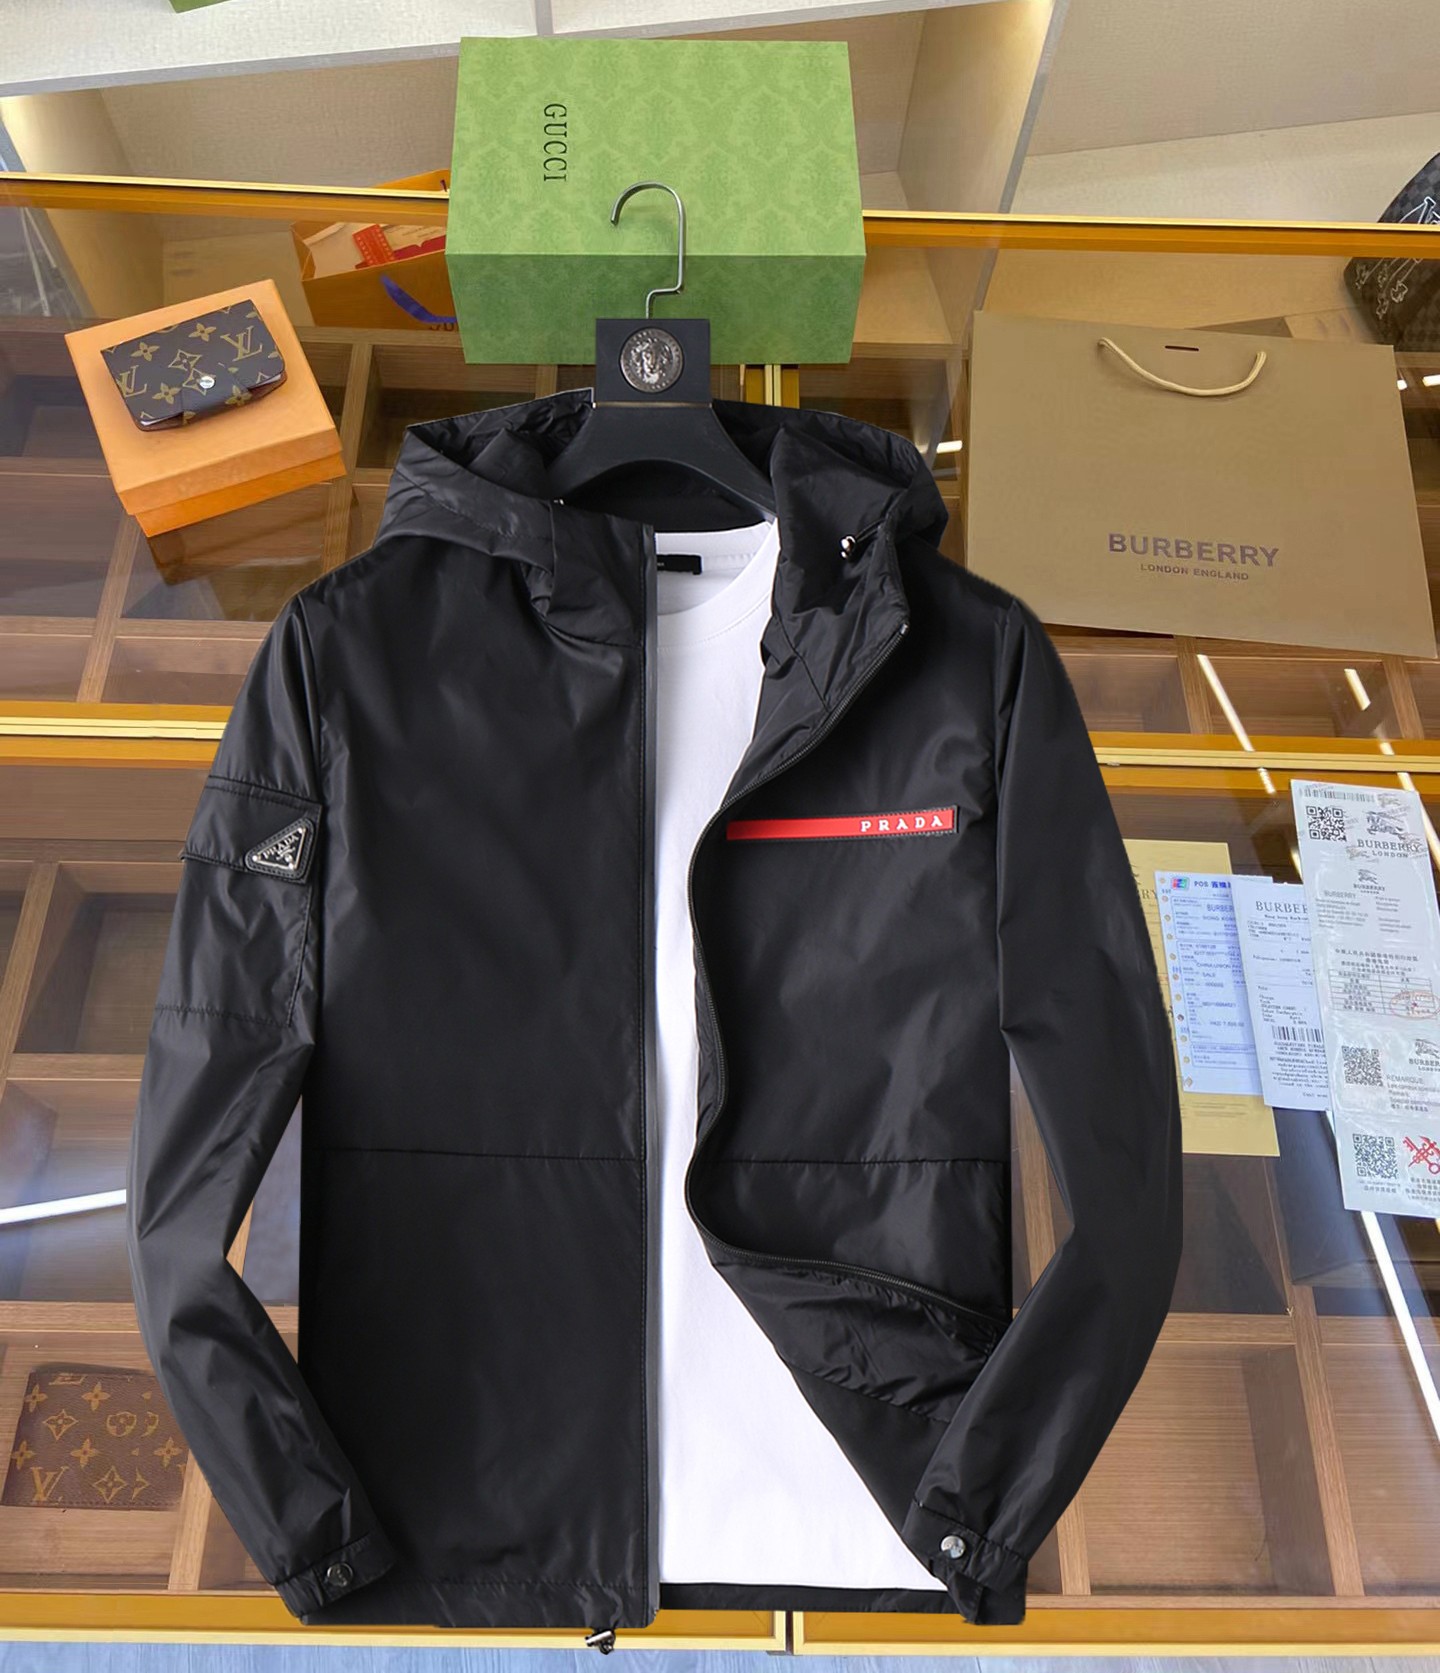 Prada Clothing Coats & Jackets Buy First Copy Replica
 Embroidery Spring Collection Fashion Hooded Top